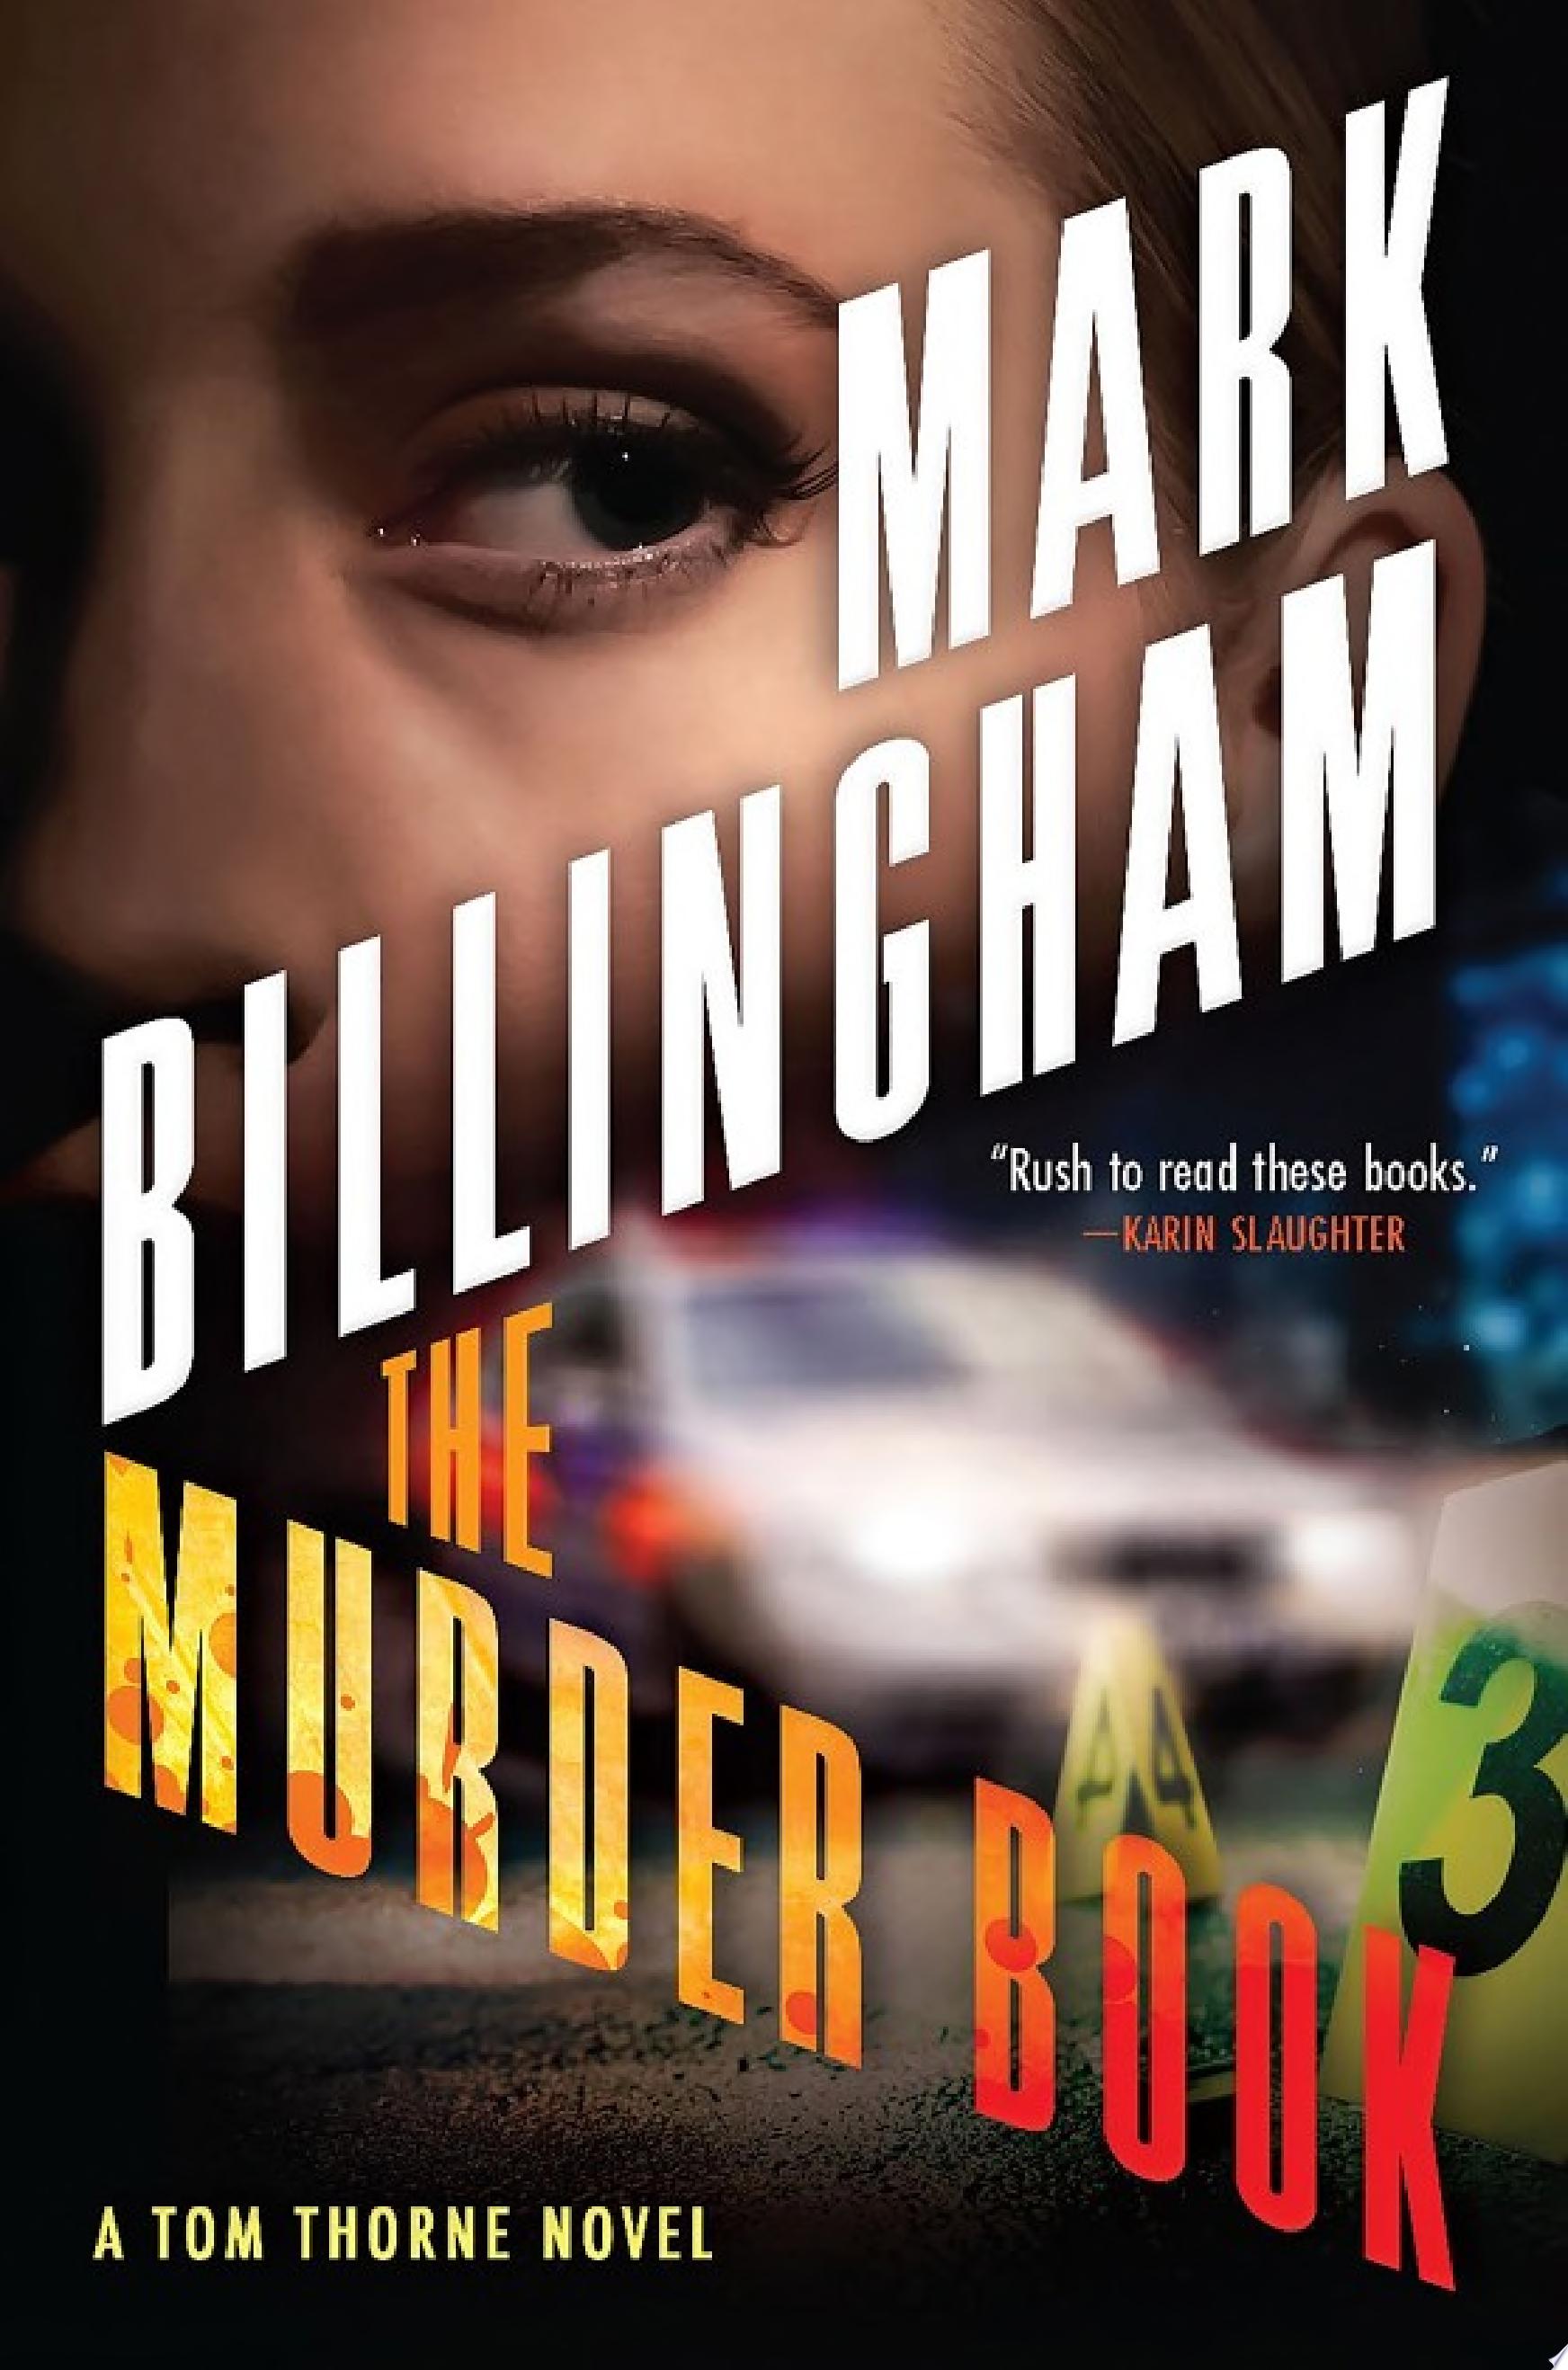 Image for "The Murder Book"